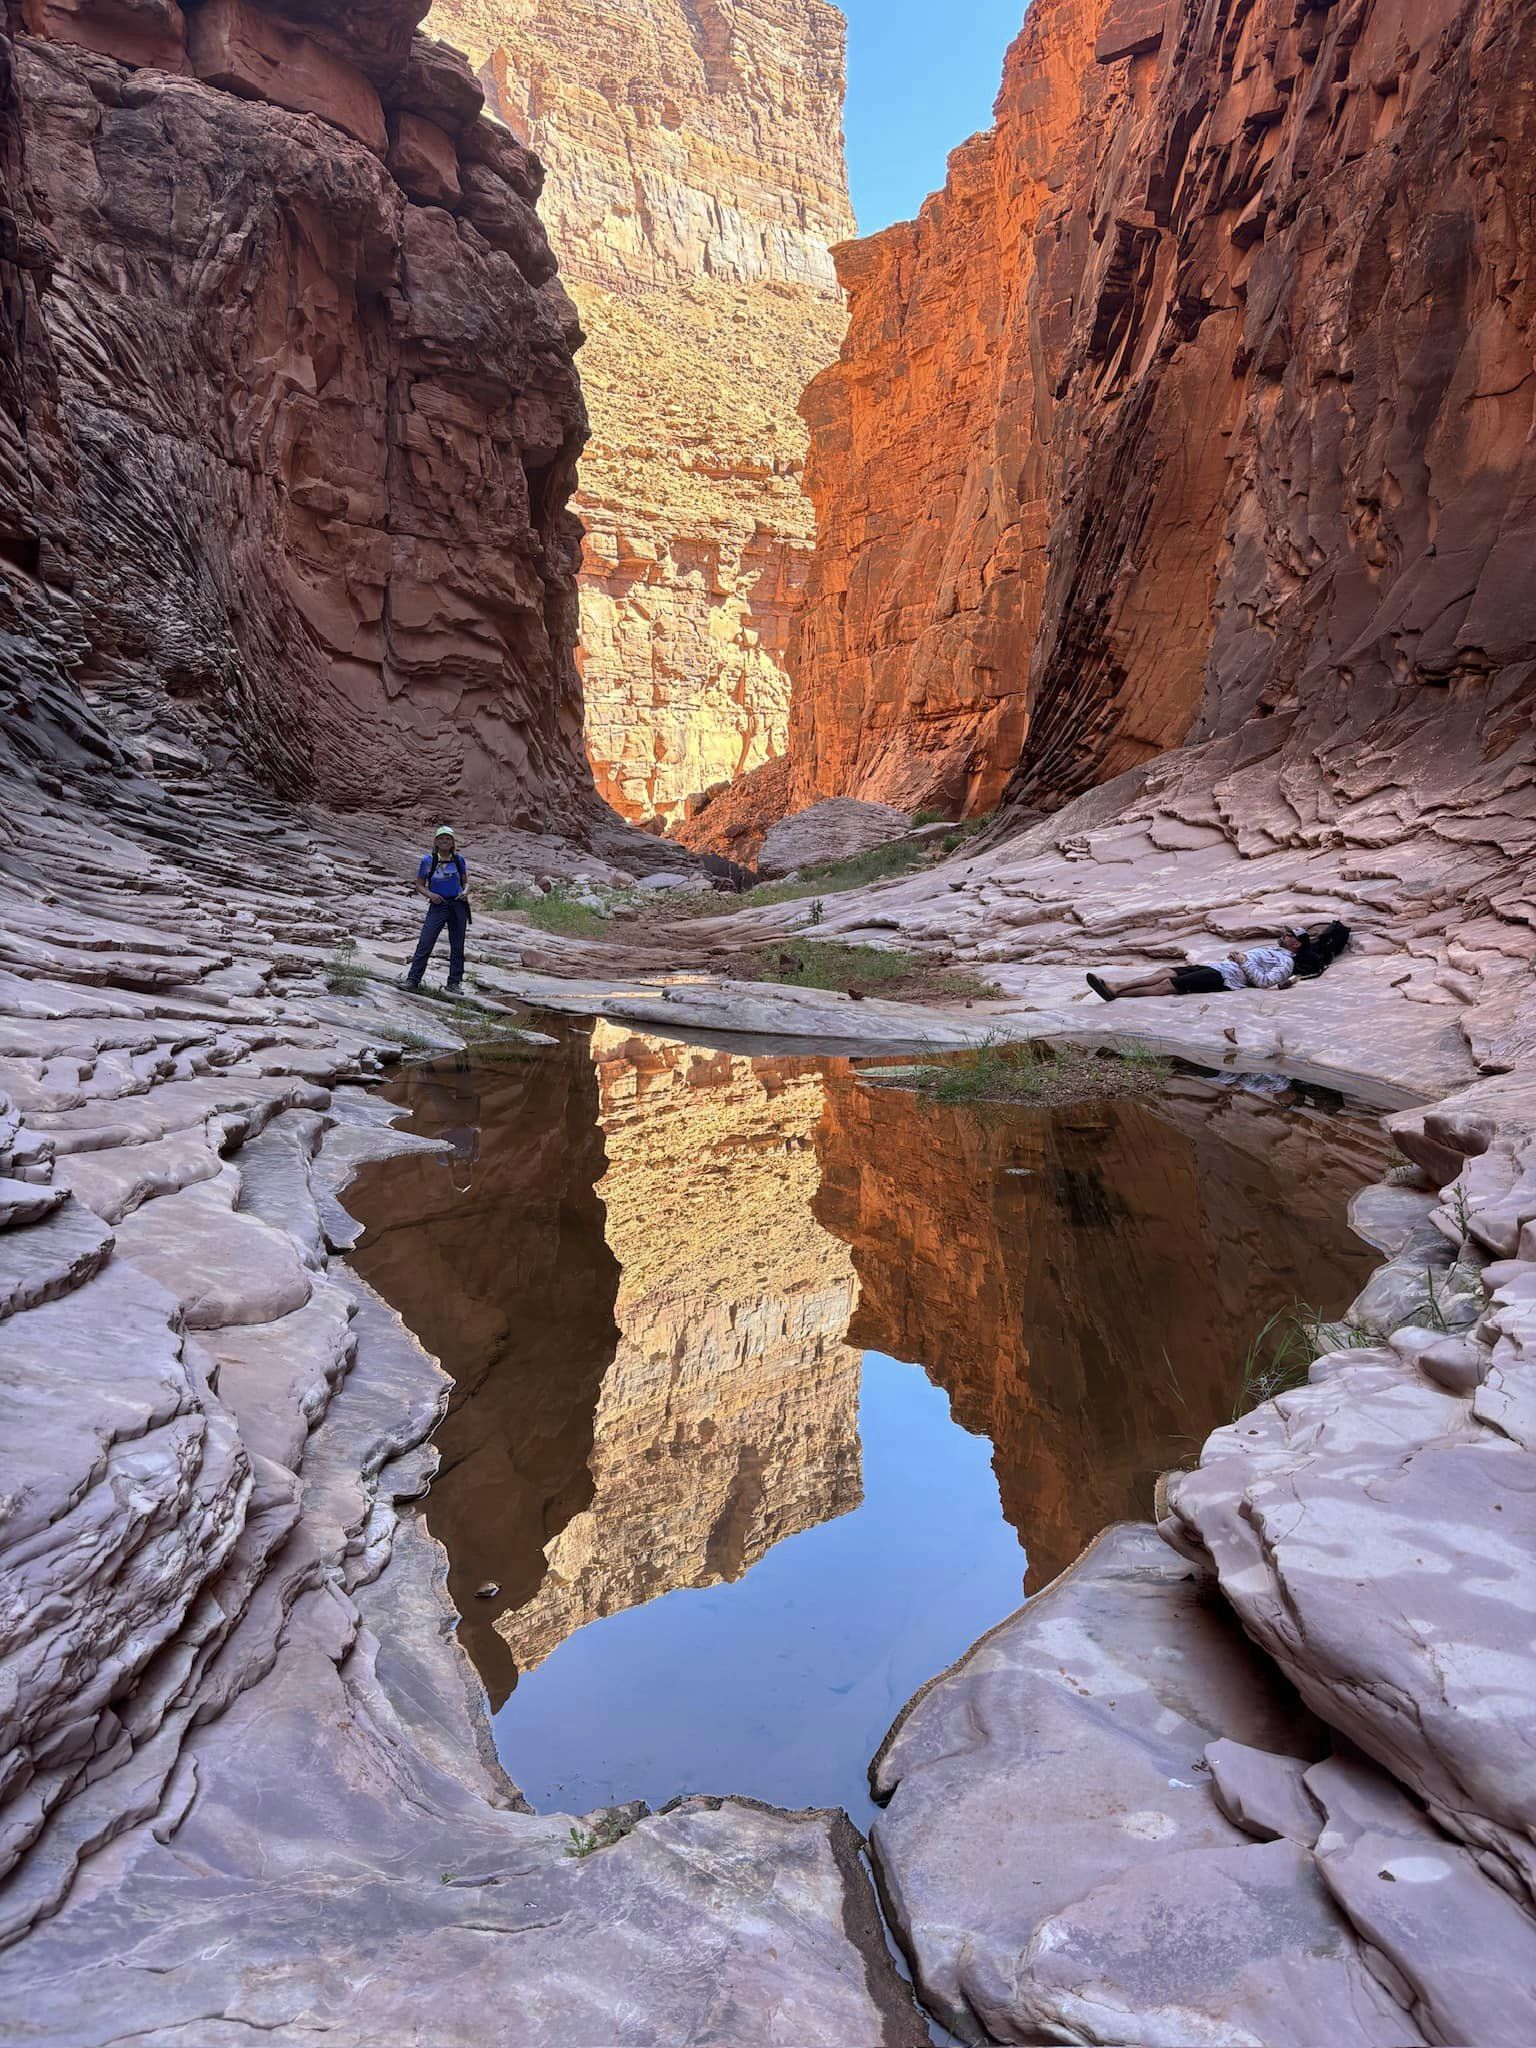 Person standing beside a pool of water in a shady side canyon in Grand Canyon. Photo credit: Caroline Marion.